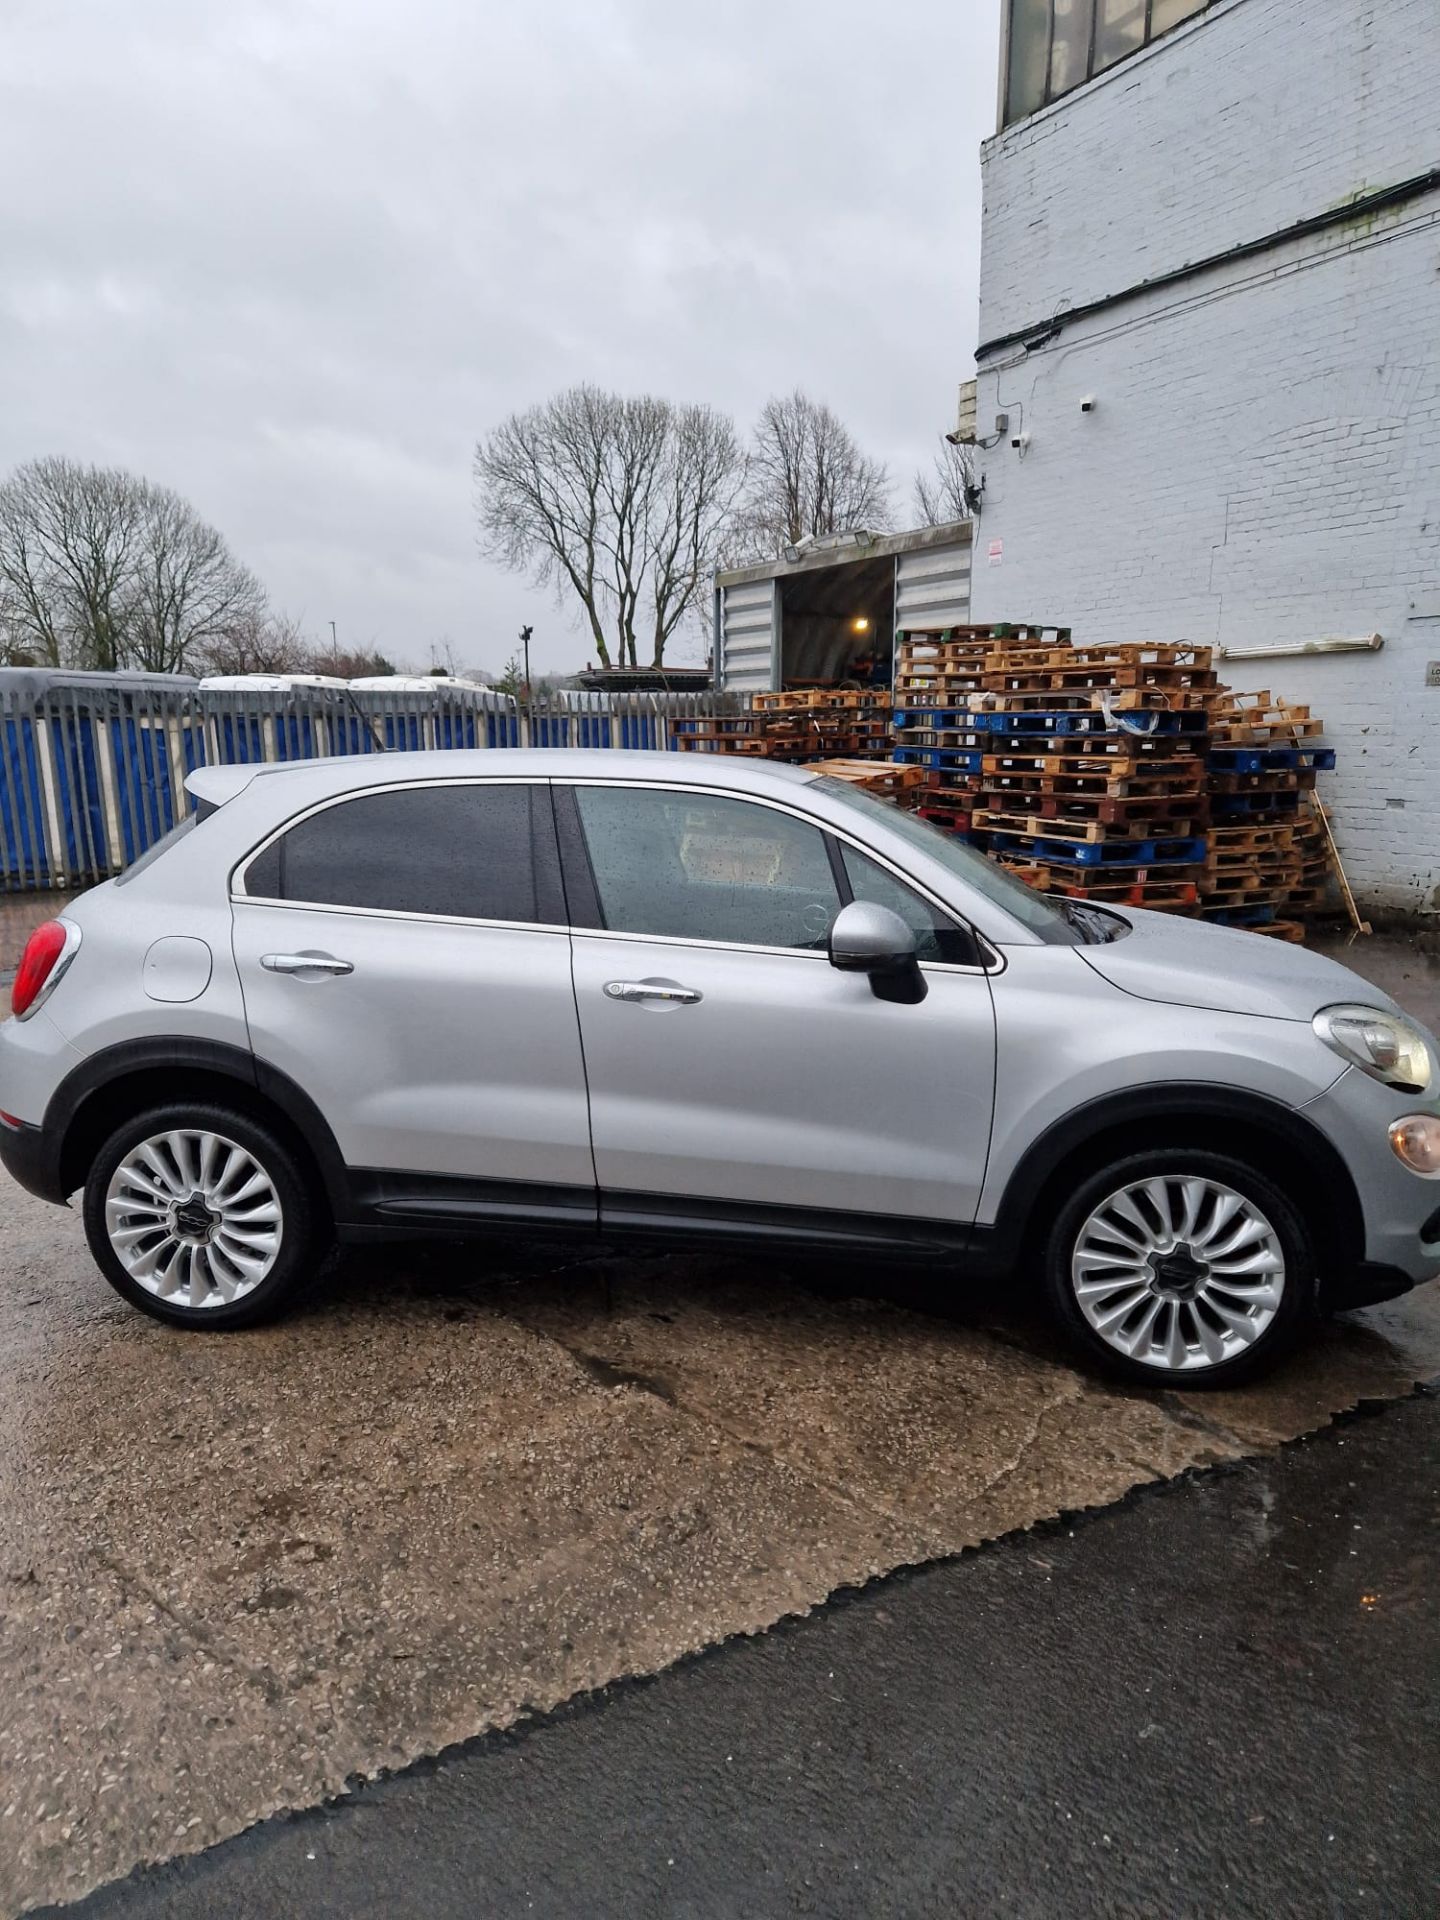 65 plate Fiat 500X Lounge multi air 1.4i, MOT until 1/10/2024, 84190 miles (unchecked), comes with 2 - Image 7 of 40